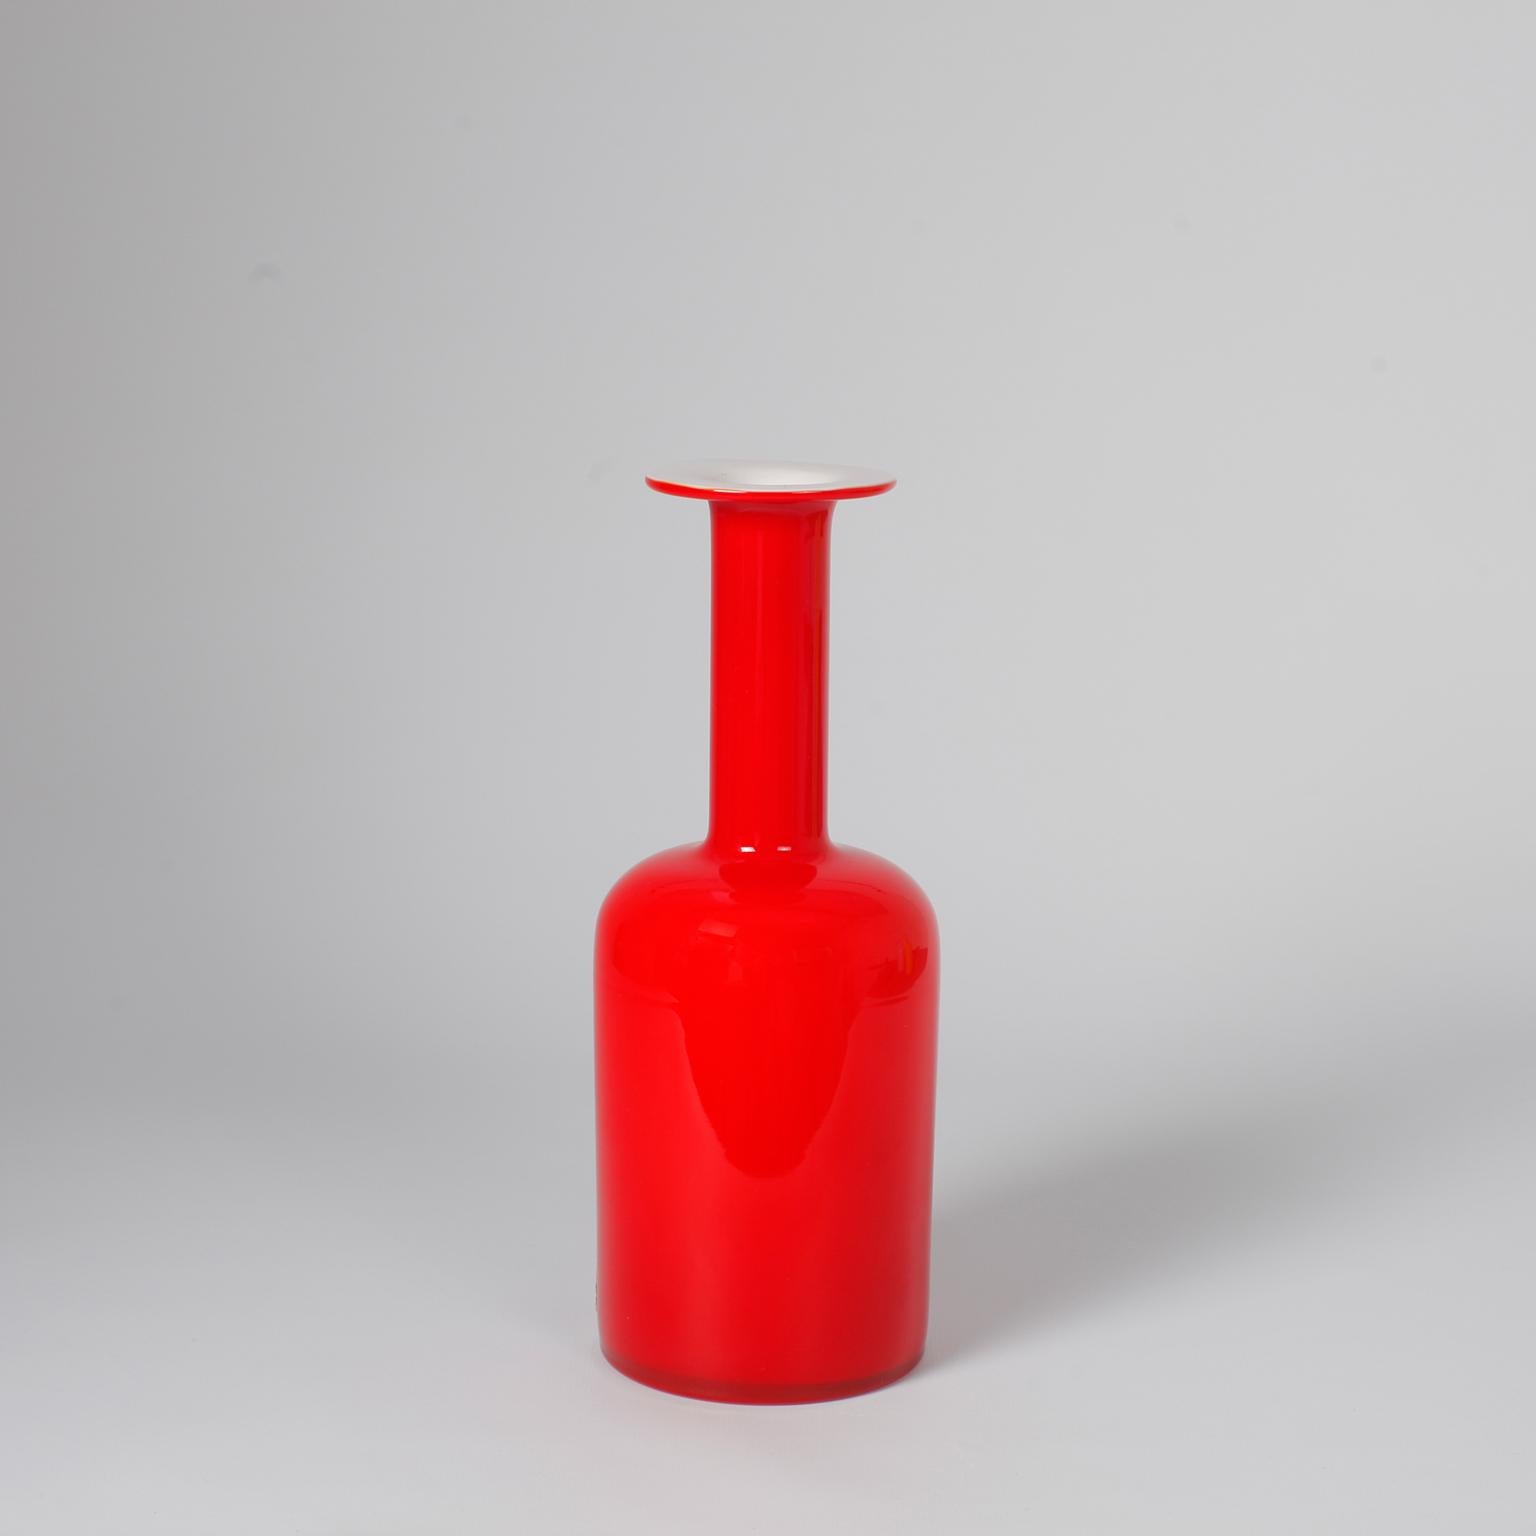 Scandinavian modern red colored glass vases,
Designed by Otto Brauer for Holmegaard Denmark, 1960s.
Measure: height 24.5 cm
labeled